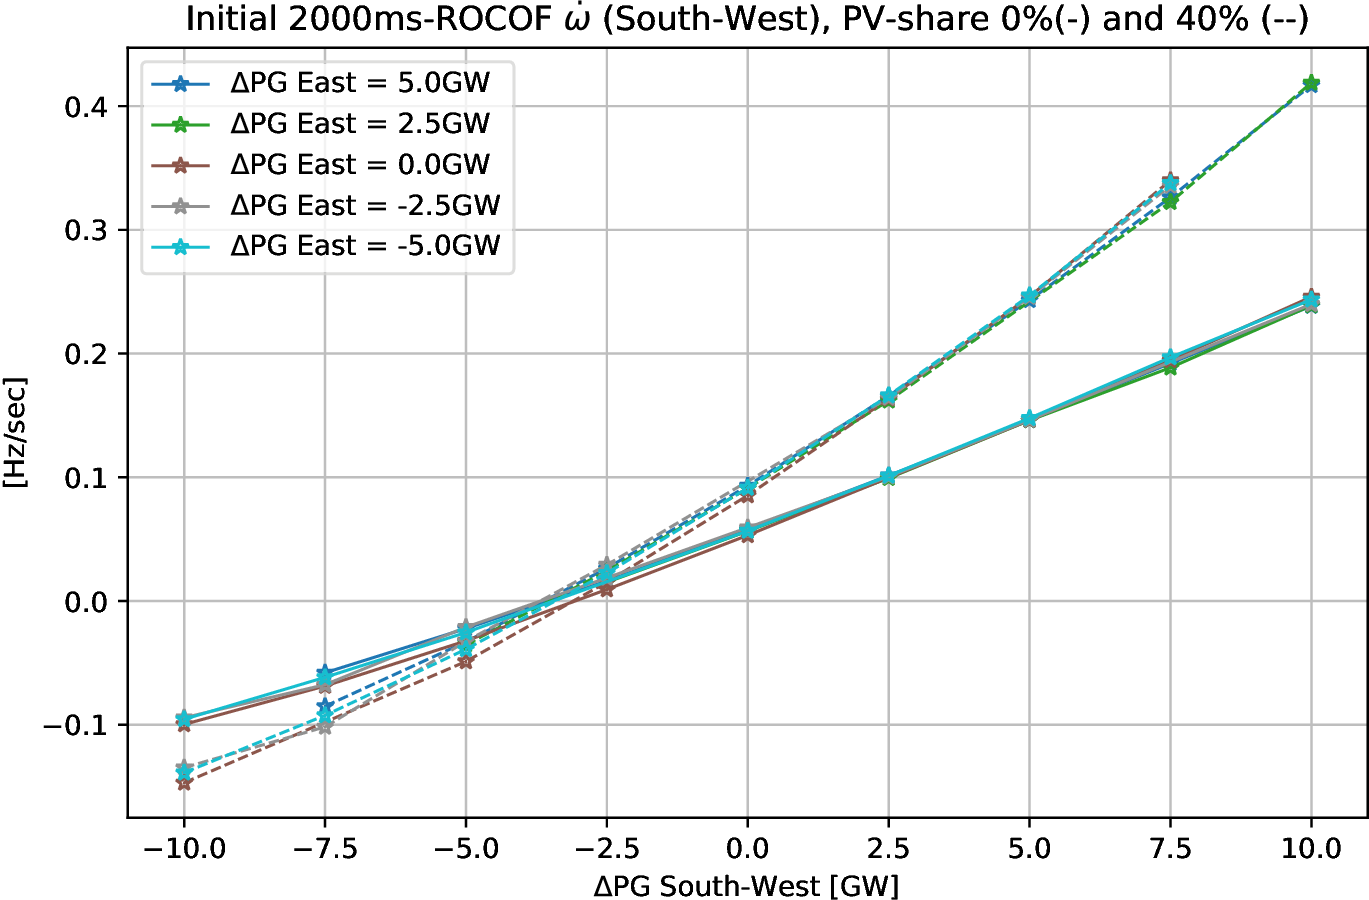 Figure: Mean ROCOF values (rate of change of the average grid frequency) in South-West as a function of generation power shifted to the region. Case with 0% and 40% RES production share. Higher power imbalance before the system split (along the x-axis) and higher RES-share (dashed lines vs. solid lines) entail higher ROCOF values.